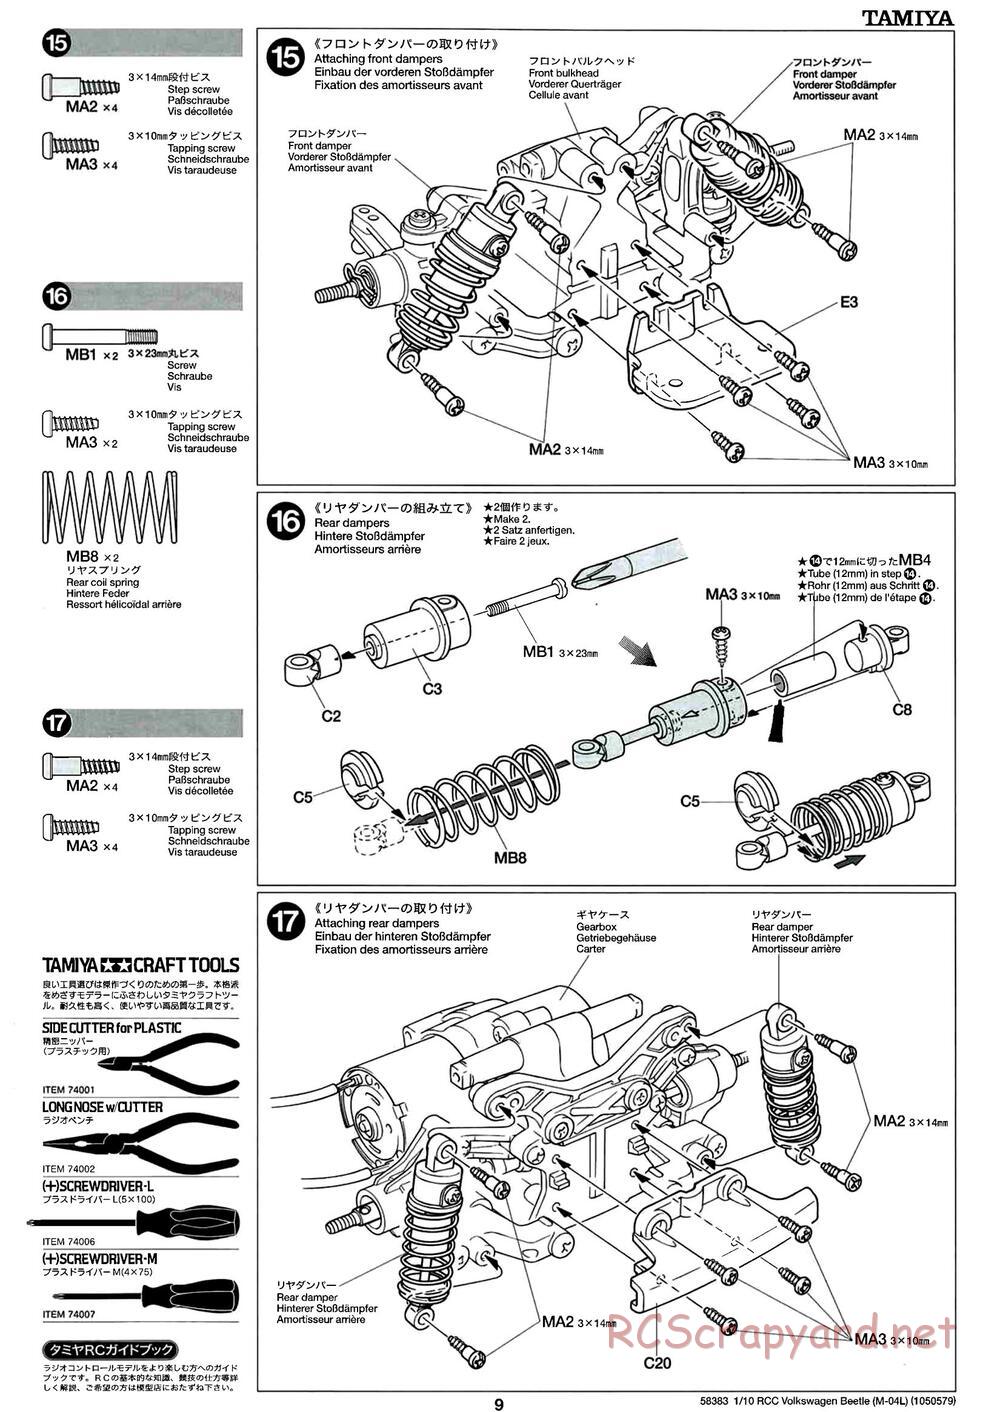 Tamiya - Volkswagen Beetle - M04L Chassis - Manual - Page 9